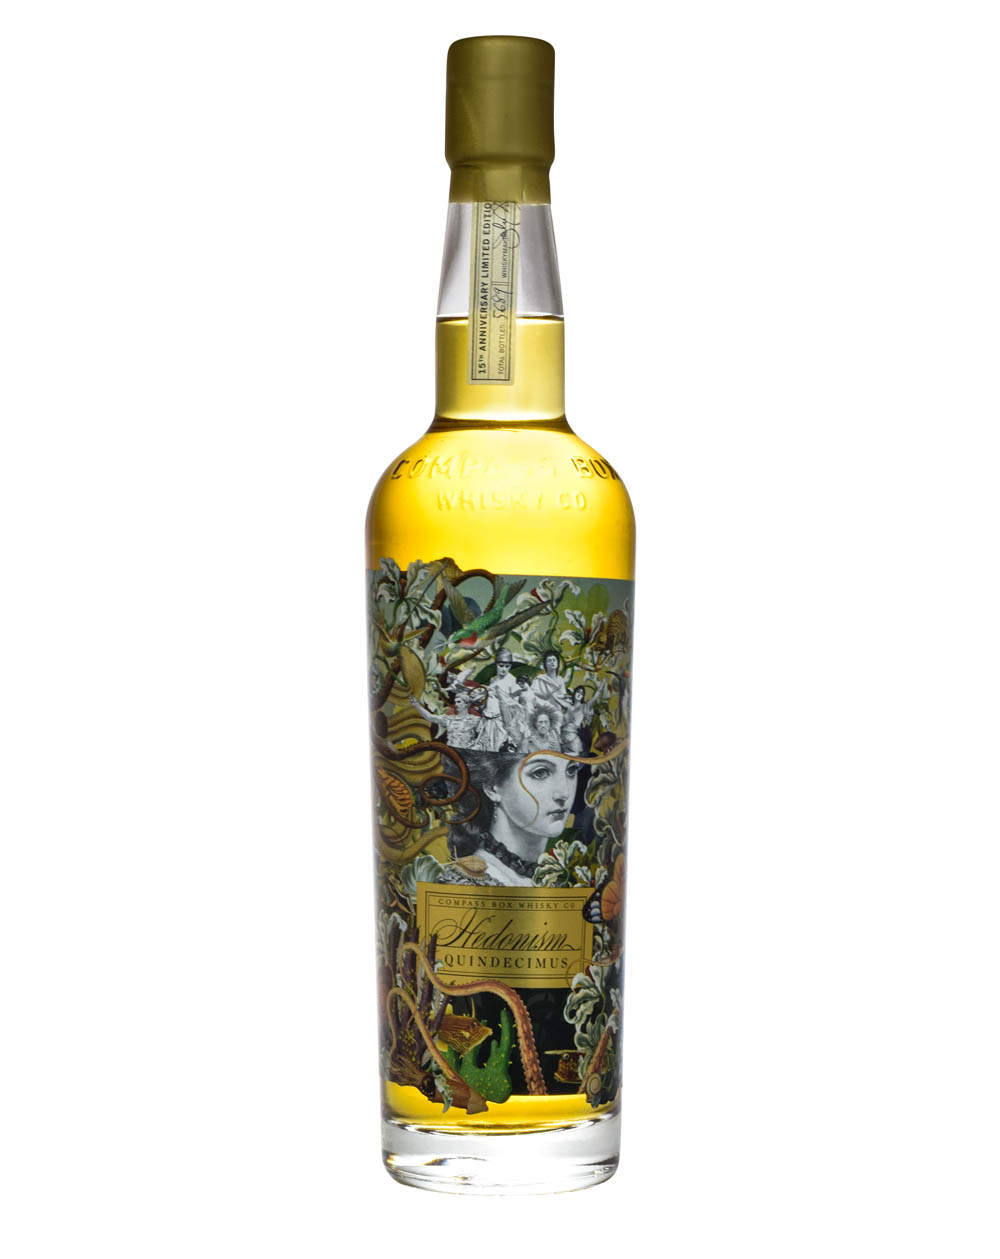 Compass Box Hedonism Quindecimus Musthave Malts MHM